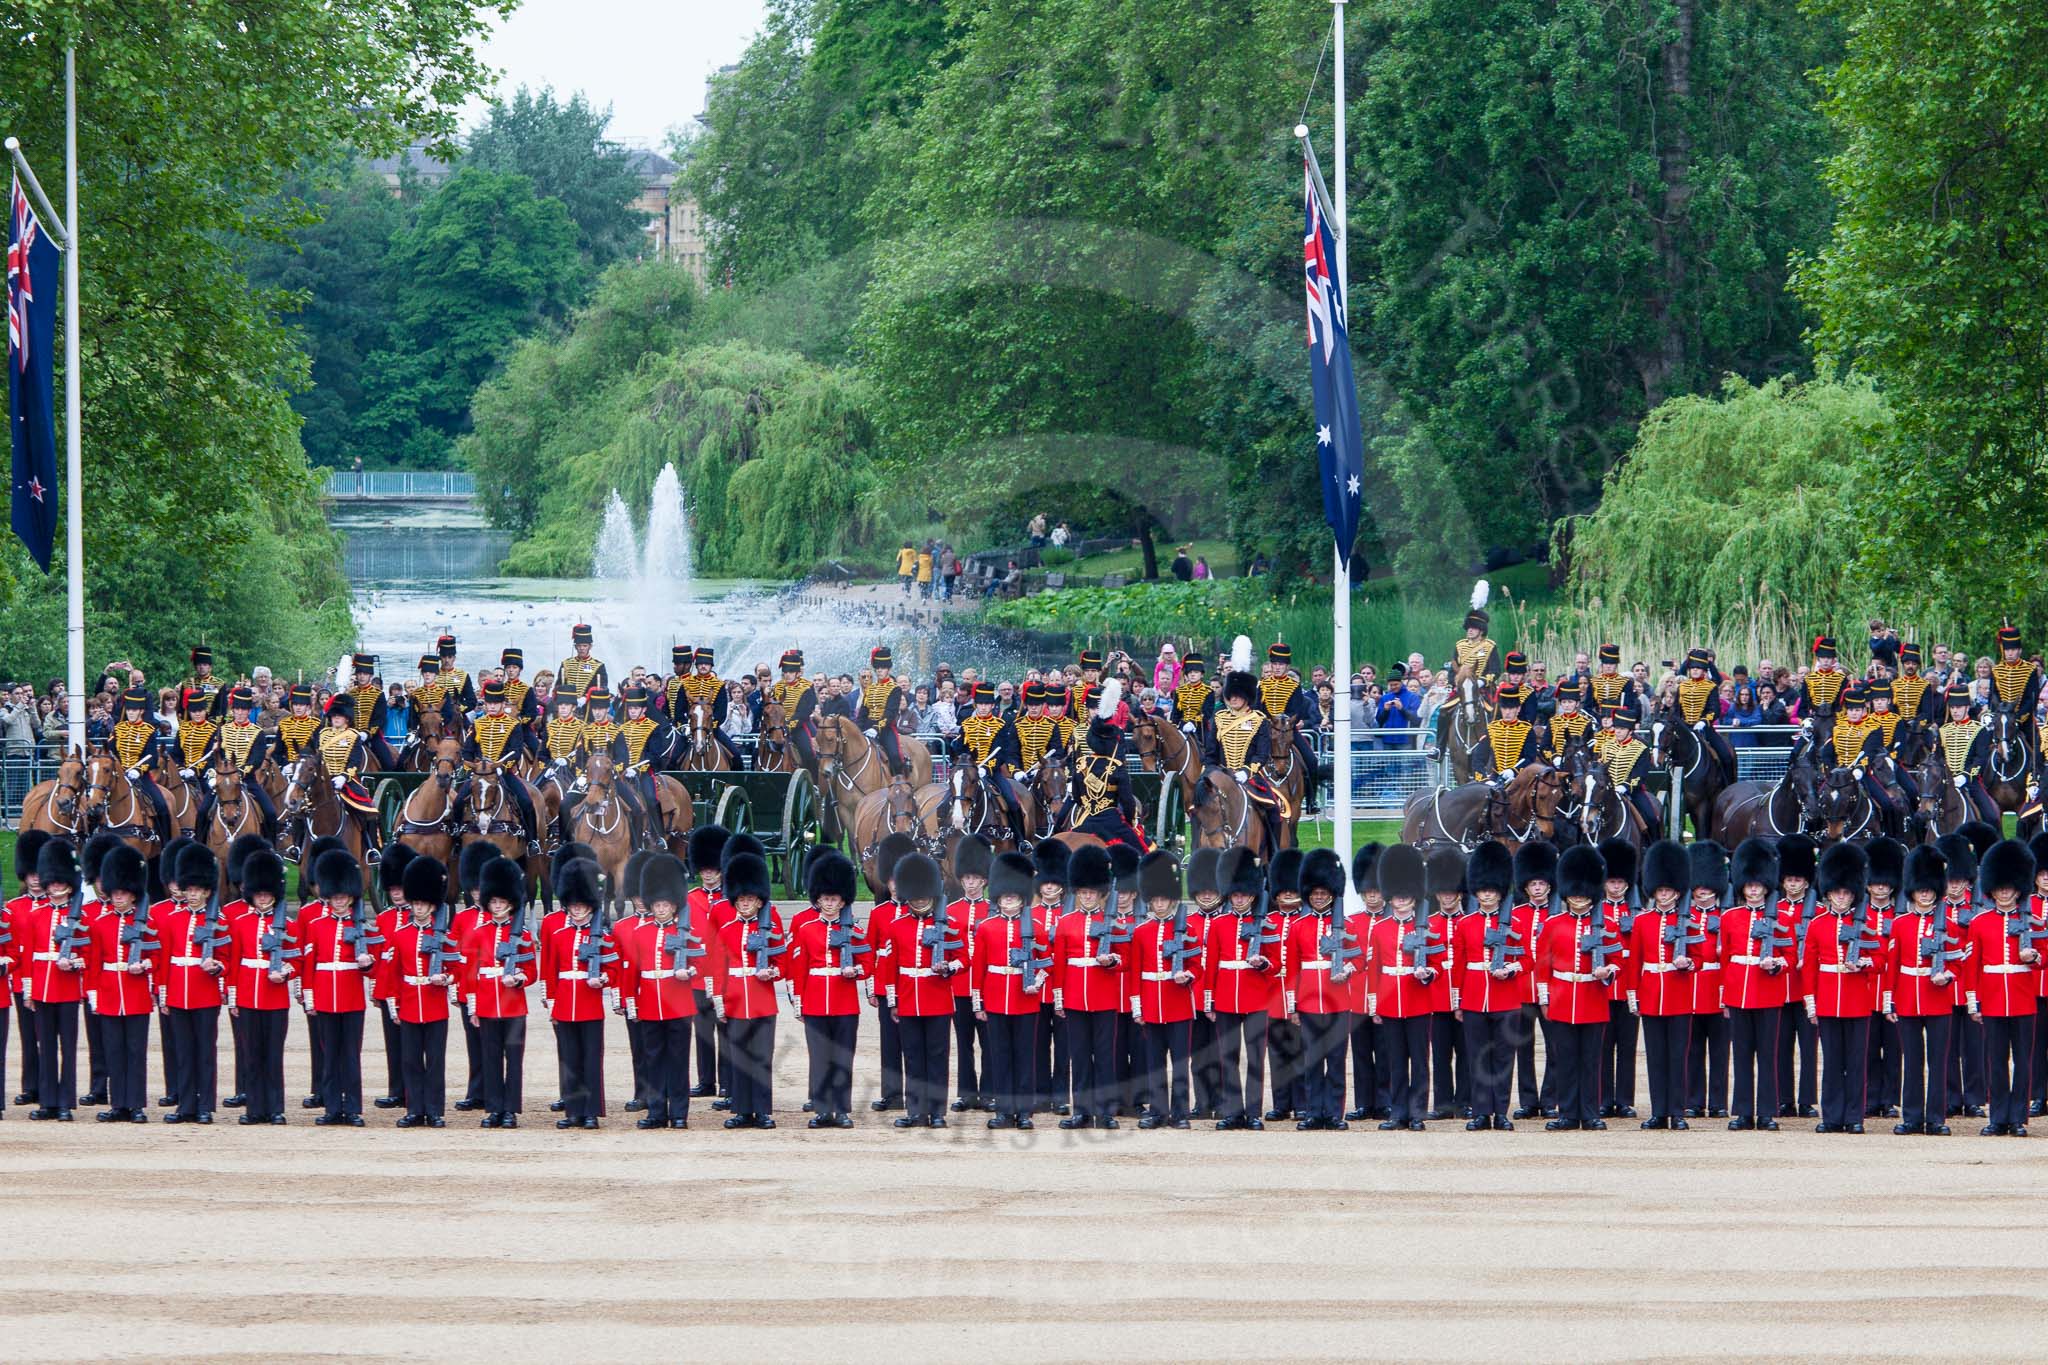 Major General's Review 2013: The King's Troop Royal Horse Artillery, now in psoition at northern side of Horse Guards Parade, with St James's Park in the background..
Horse Guards Parade, Westminster,
London SW1,

United Kingdom,
on 01 June 2013 at 10:39, image #165